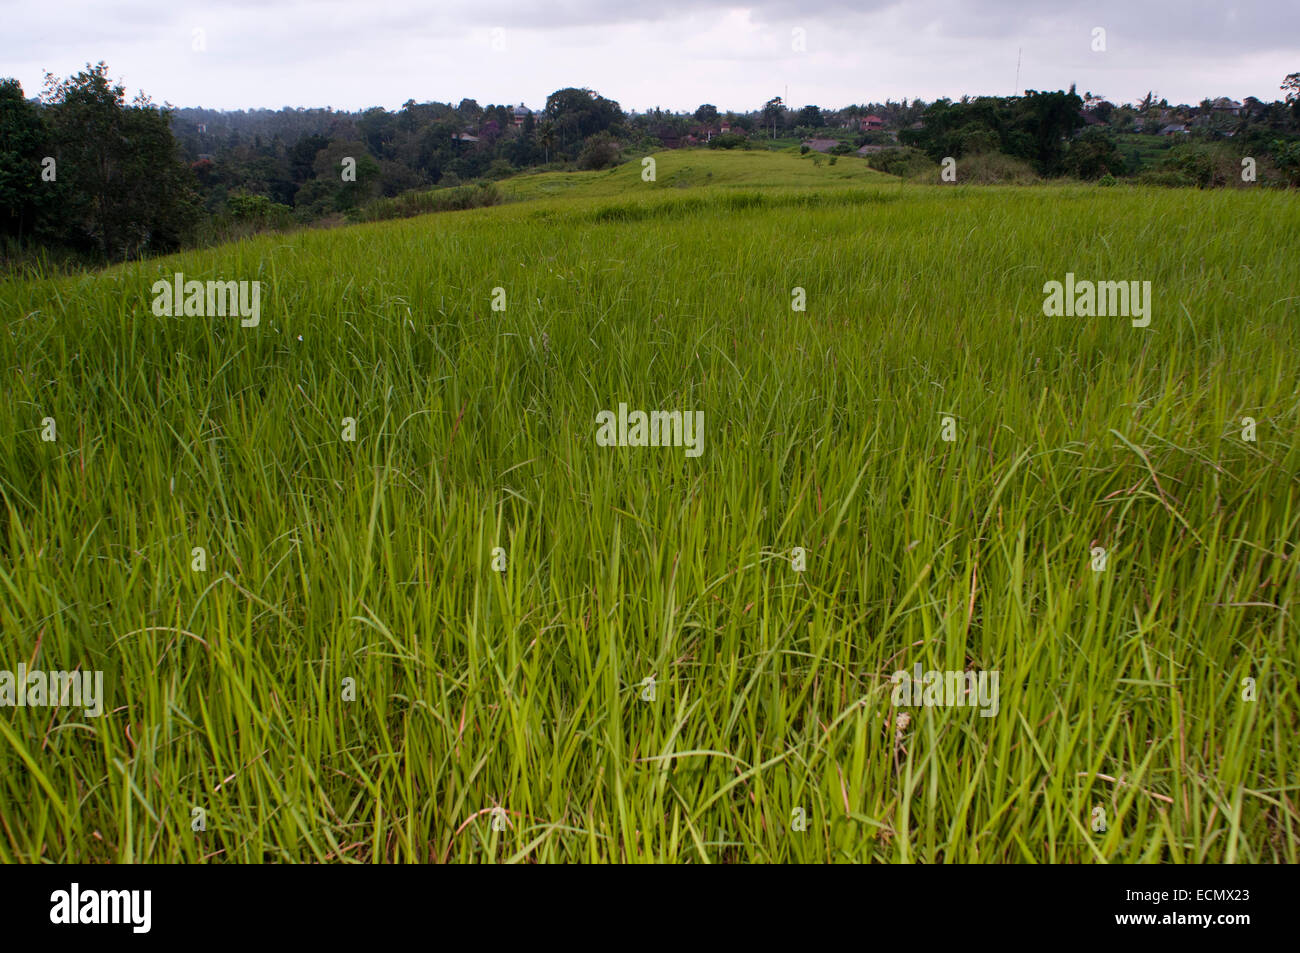 Rice fields terraces that accompany the walk Campuan crest. Ubud. Bali. On the Campuan ridge walk in Ubud, Bali, beautiful green rice terraces and coconut palm trees dot the Campuan River. Stock Photo